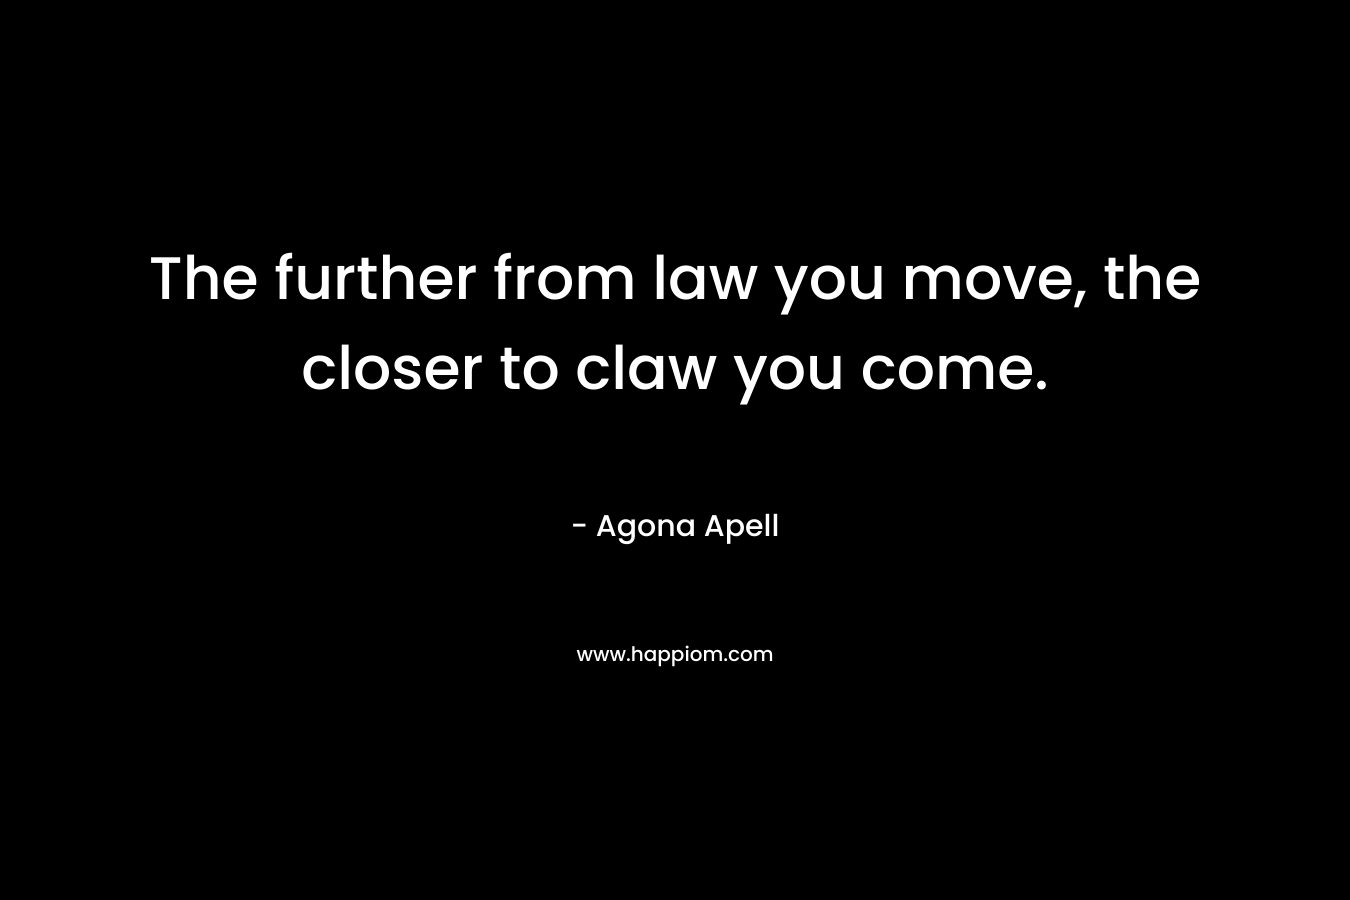 The further from law you move, the closer to claw you come.